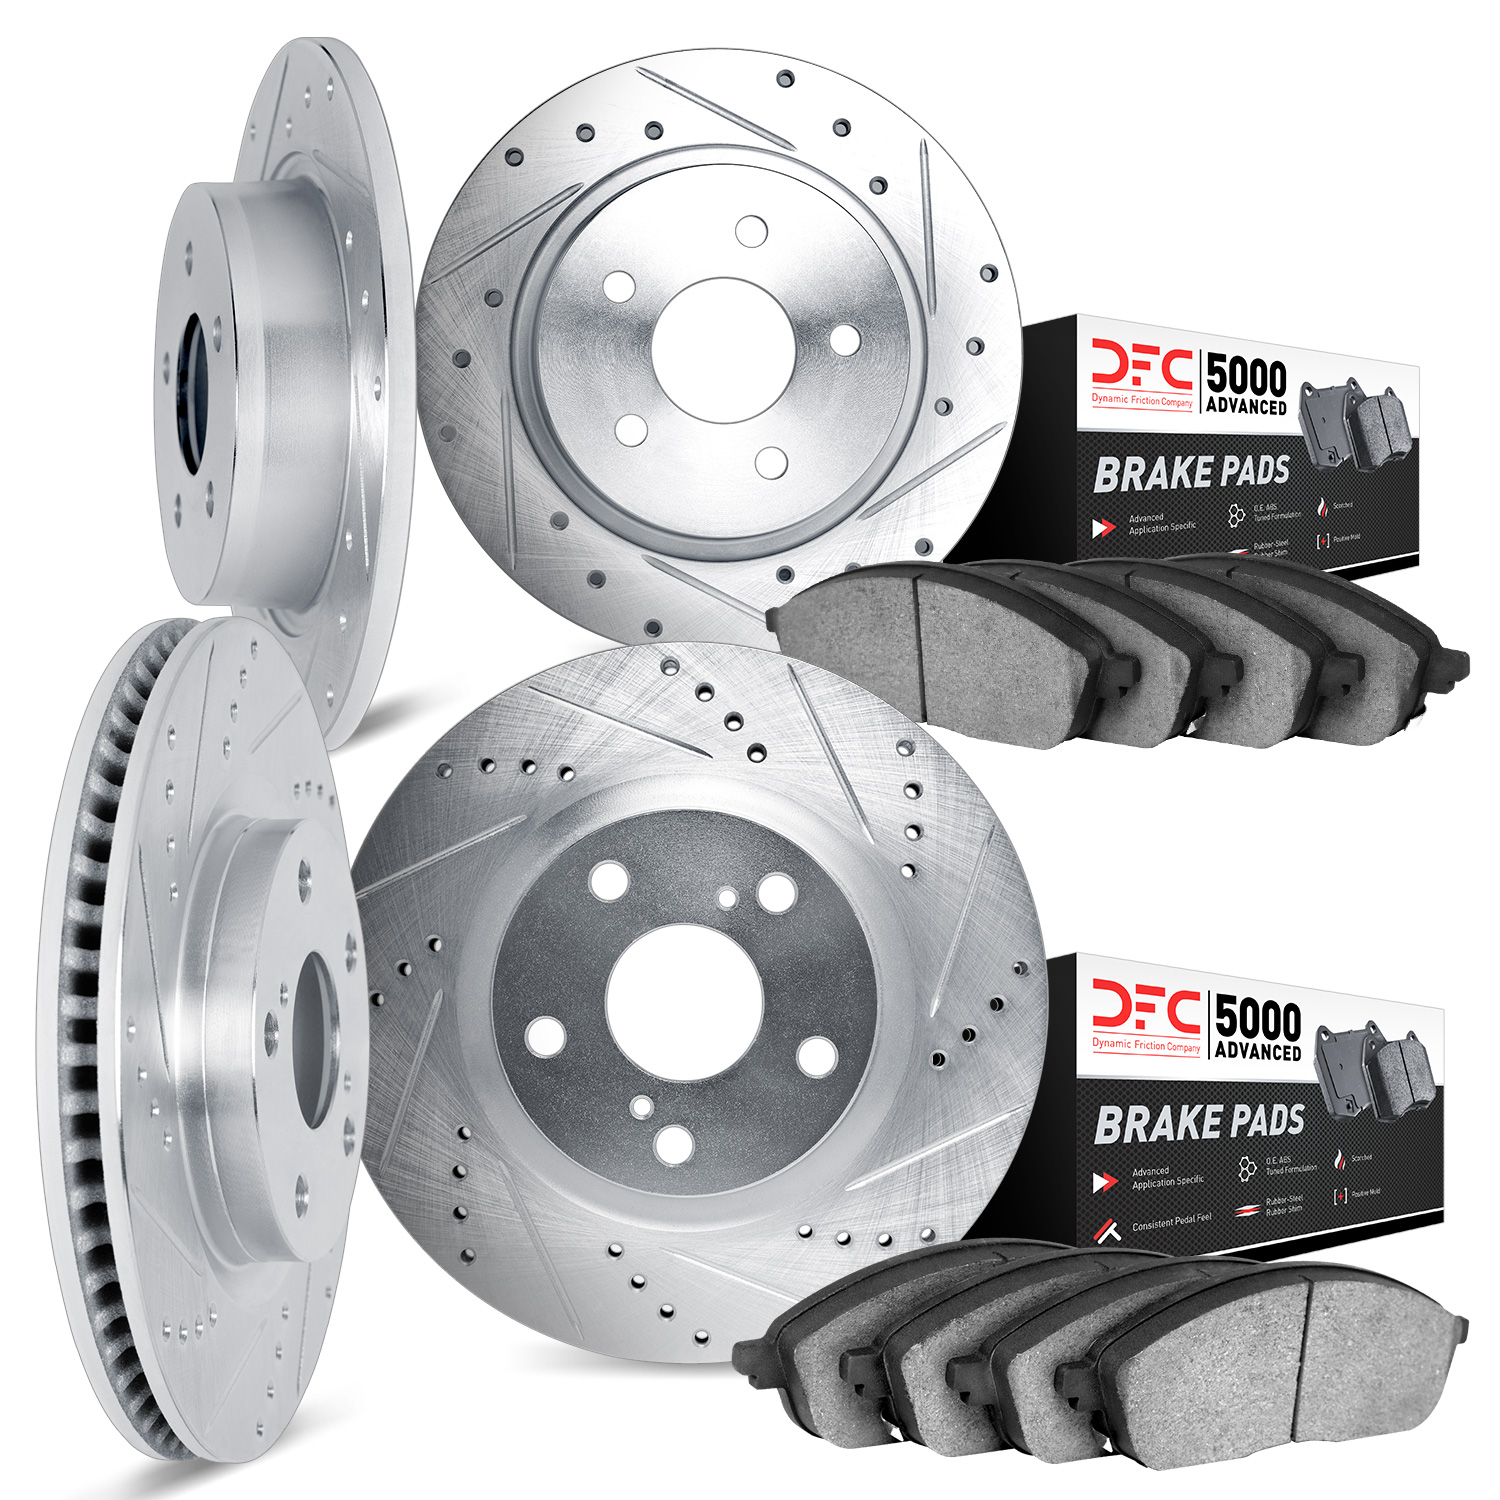 7504-54286 Drilled/Slotted Brake Rotors w/5000 Advanced Brake Pads Kit [Silver], 2006-2013 Ford/Lincoln/Mercury/Mazda, Position: